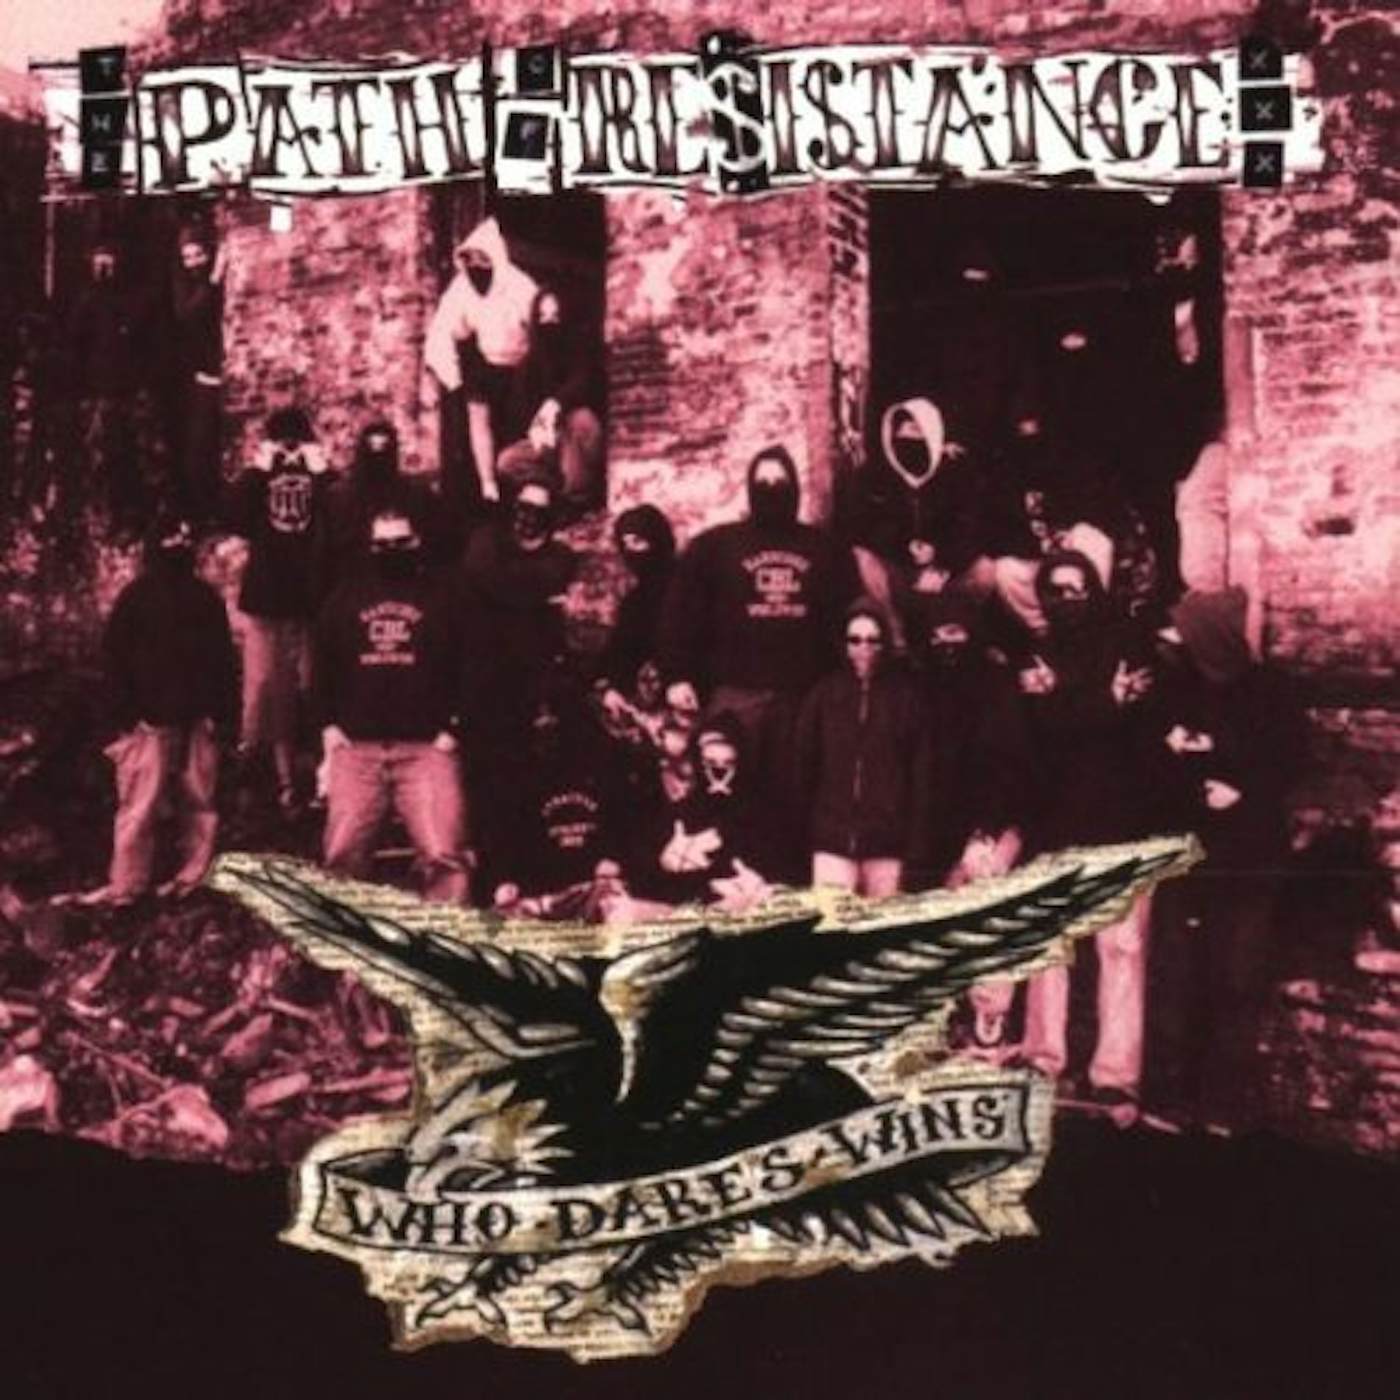 Path Of Resistance WHO DARES WINS CD